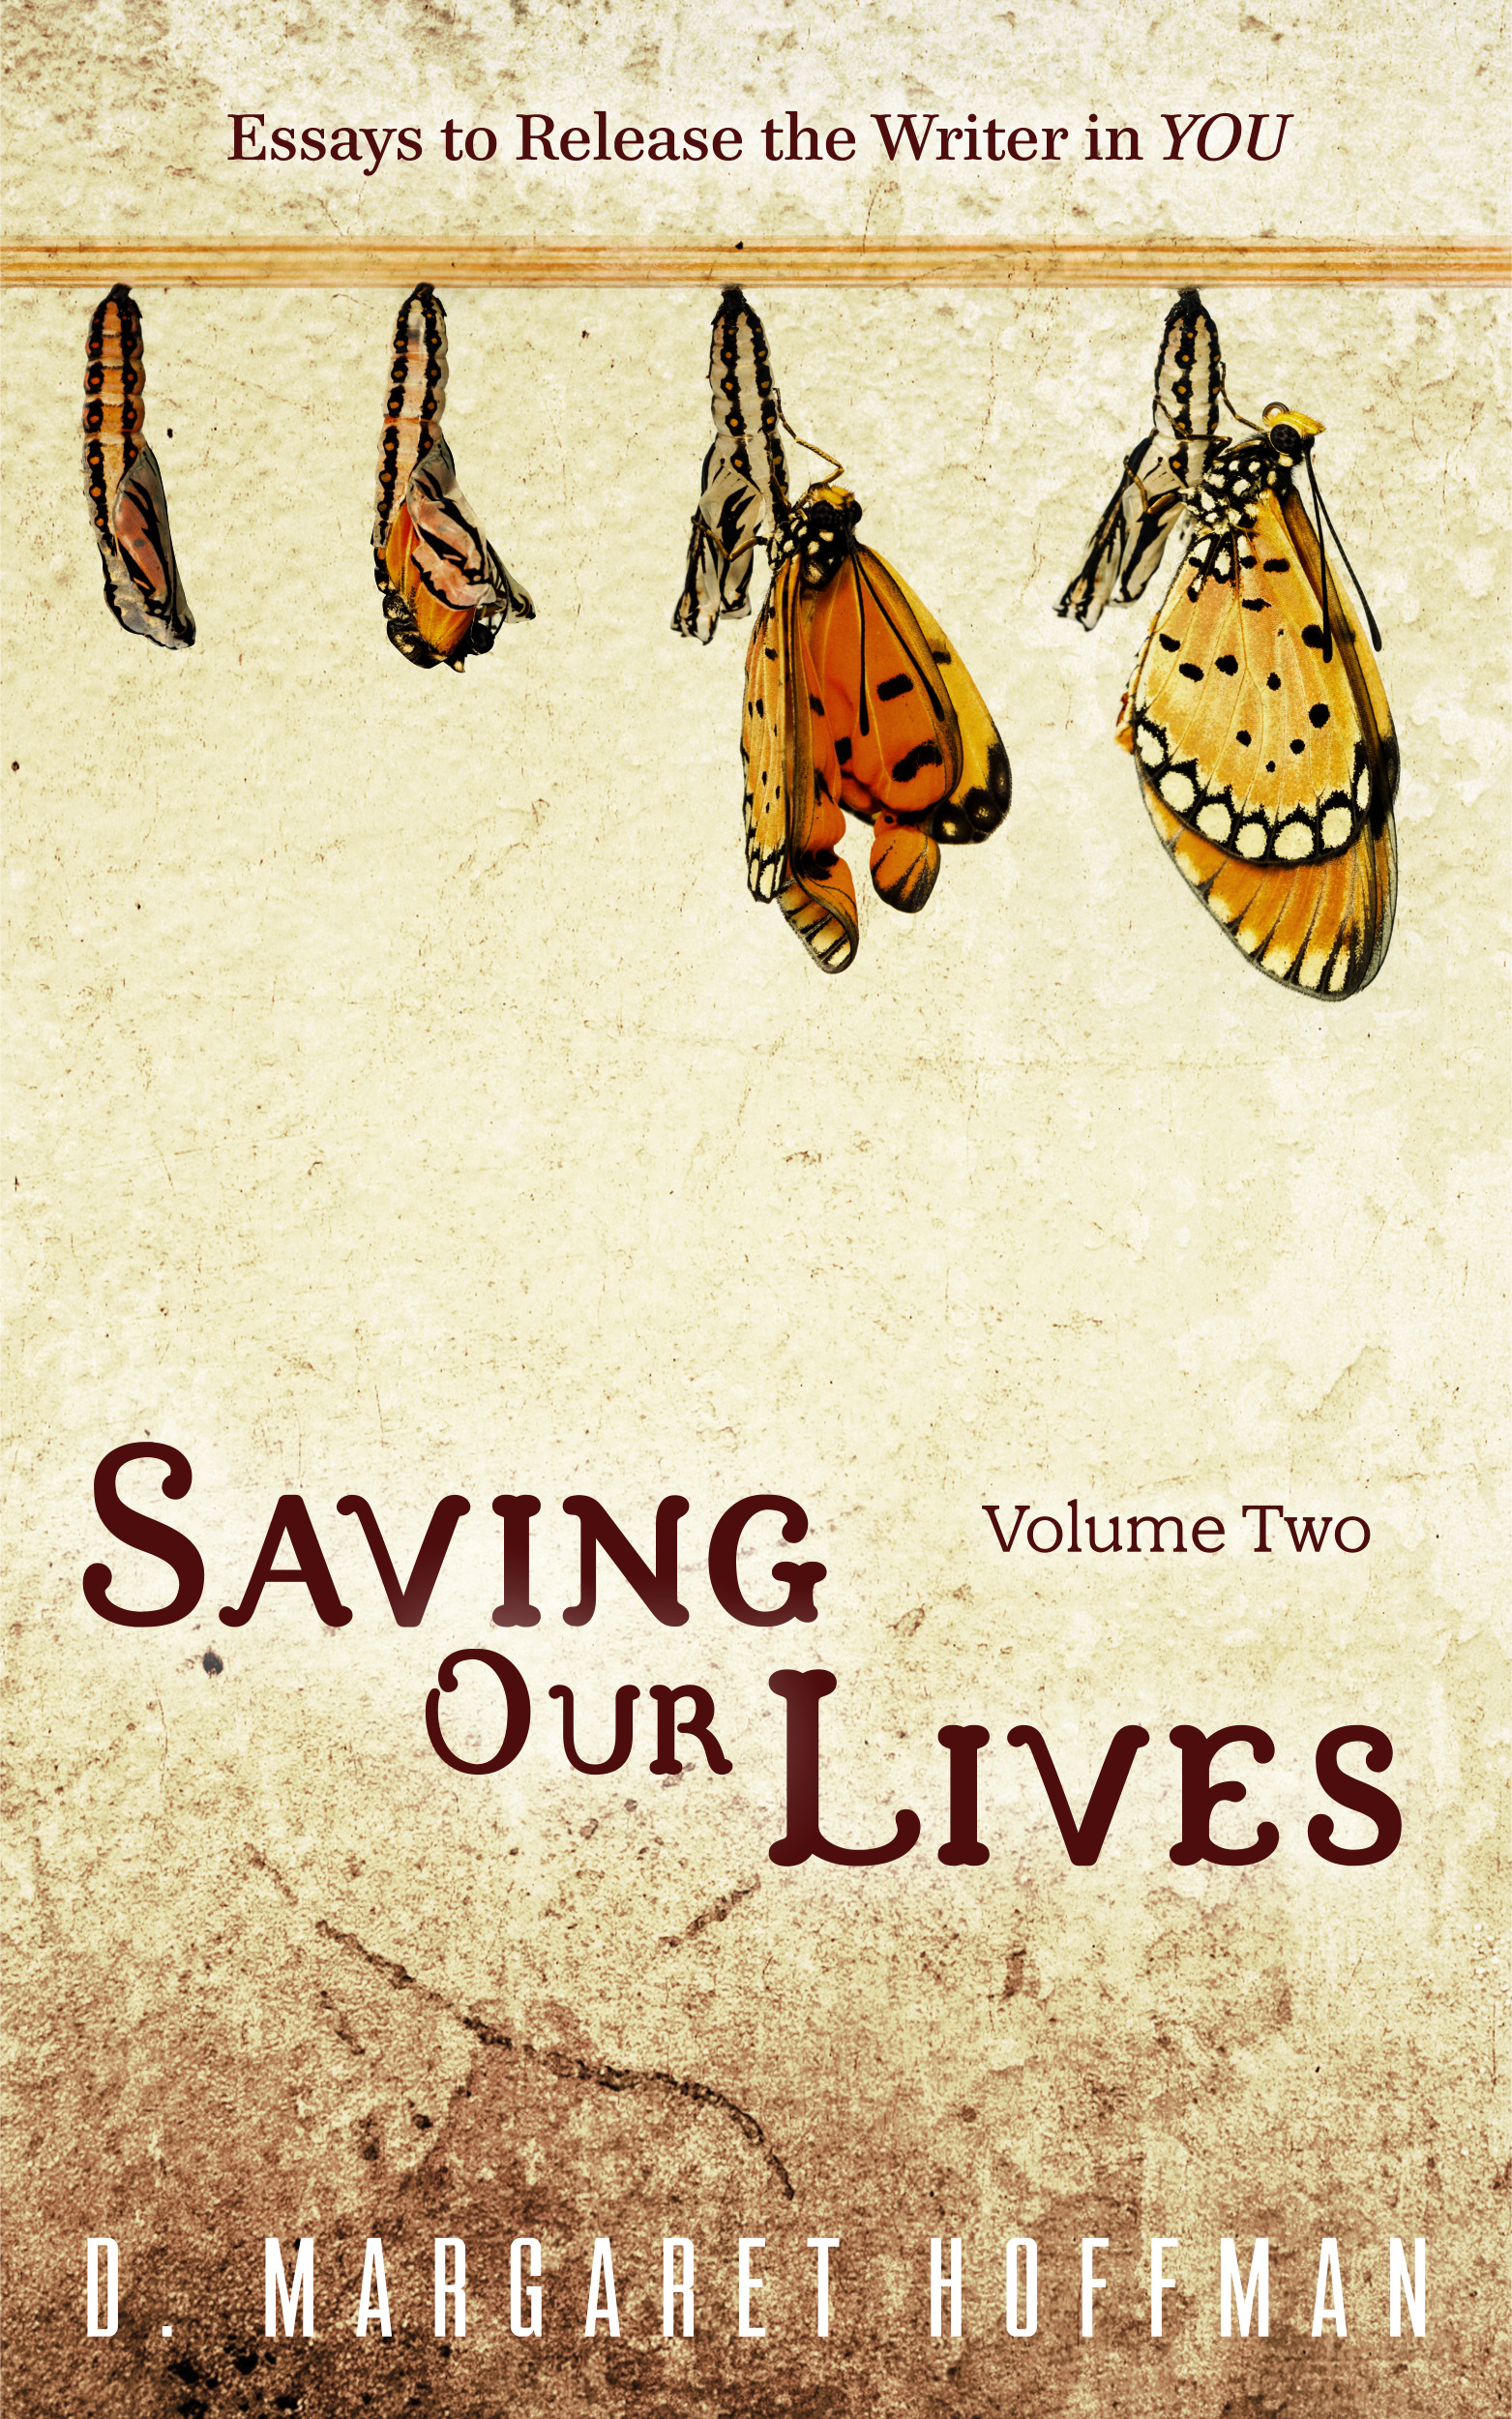 Buy Saving Our Lives Volume Two on Amazon